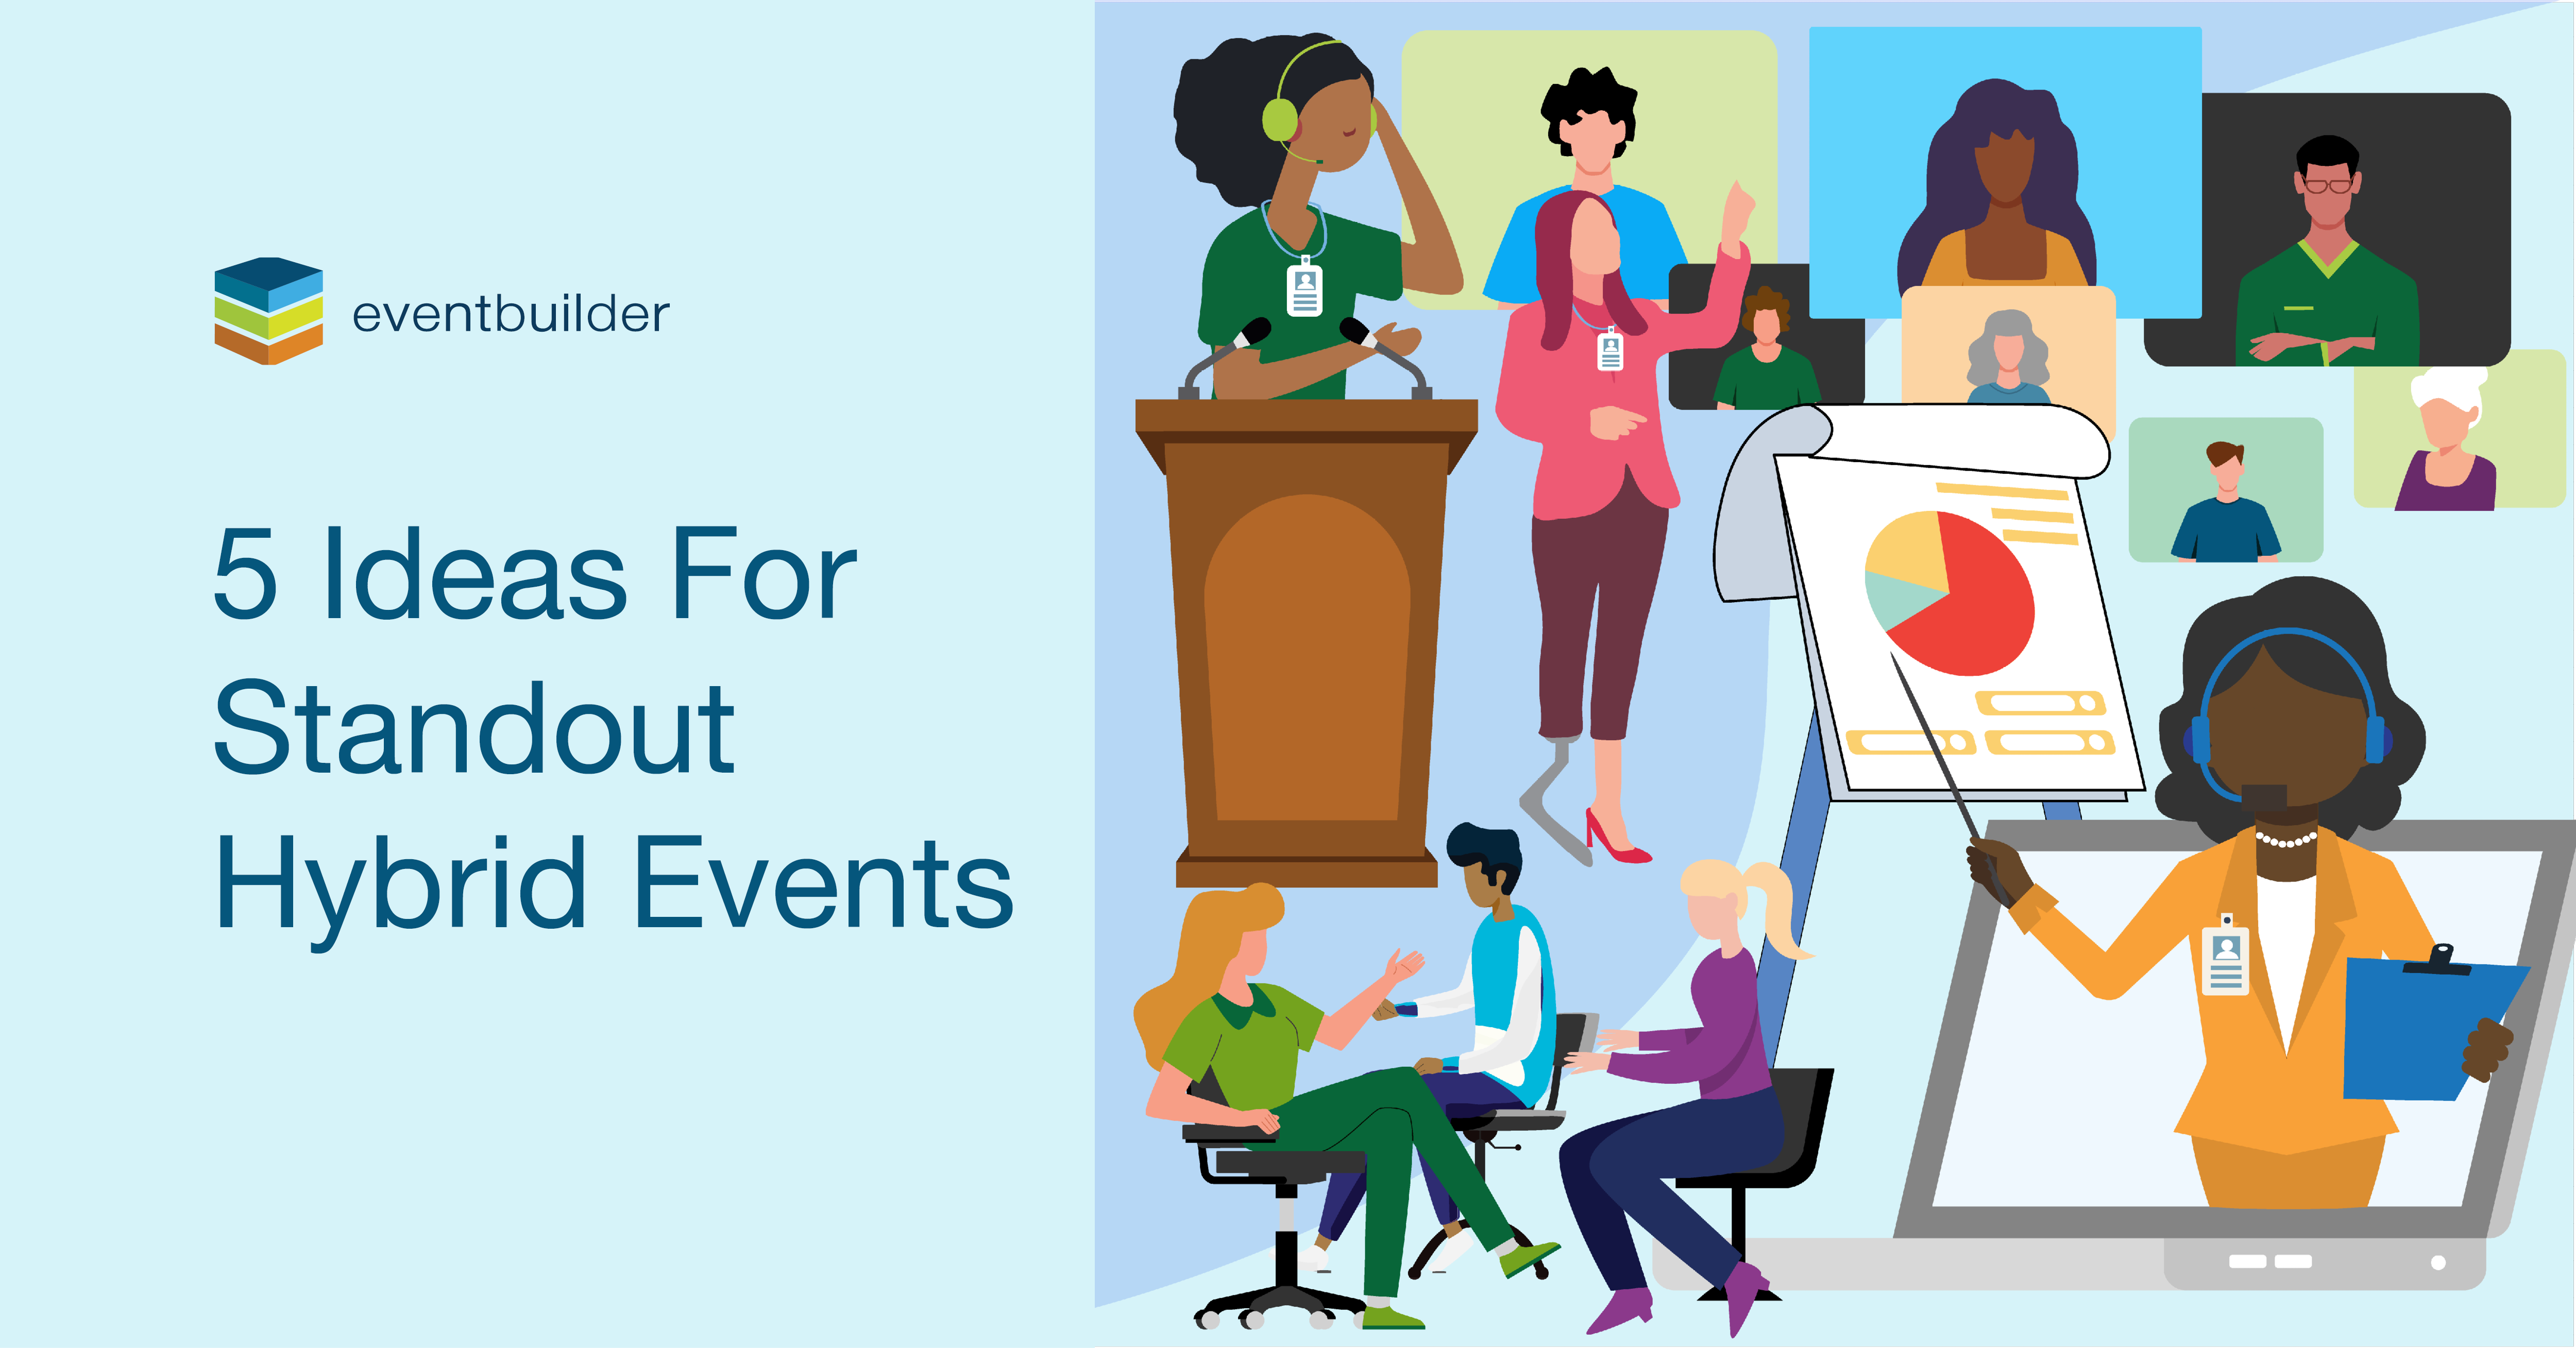 5 Ideas For Standout Hybrid Events